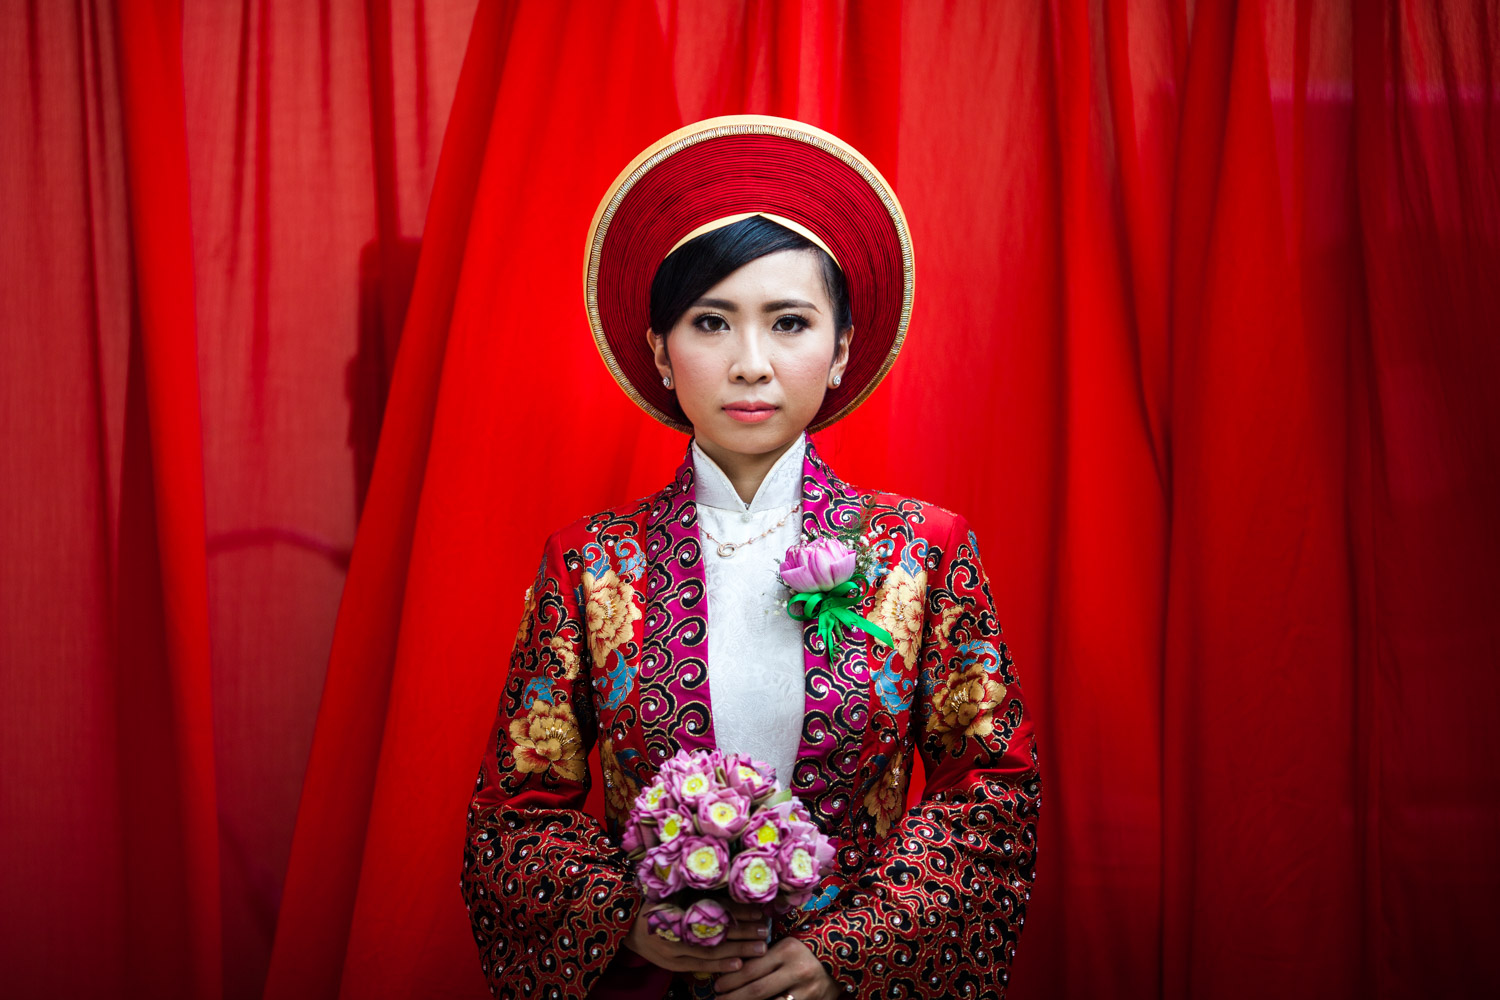 A portrait of a young Vietnamese bride on her wedding day in Ho Chi Minh City.